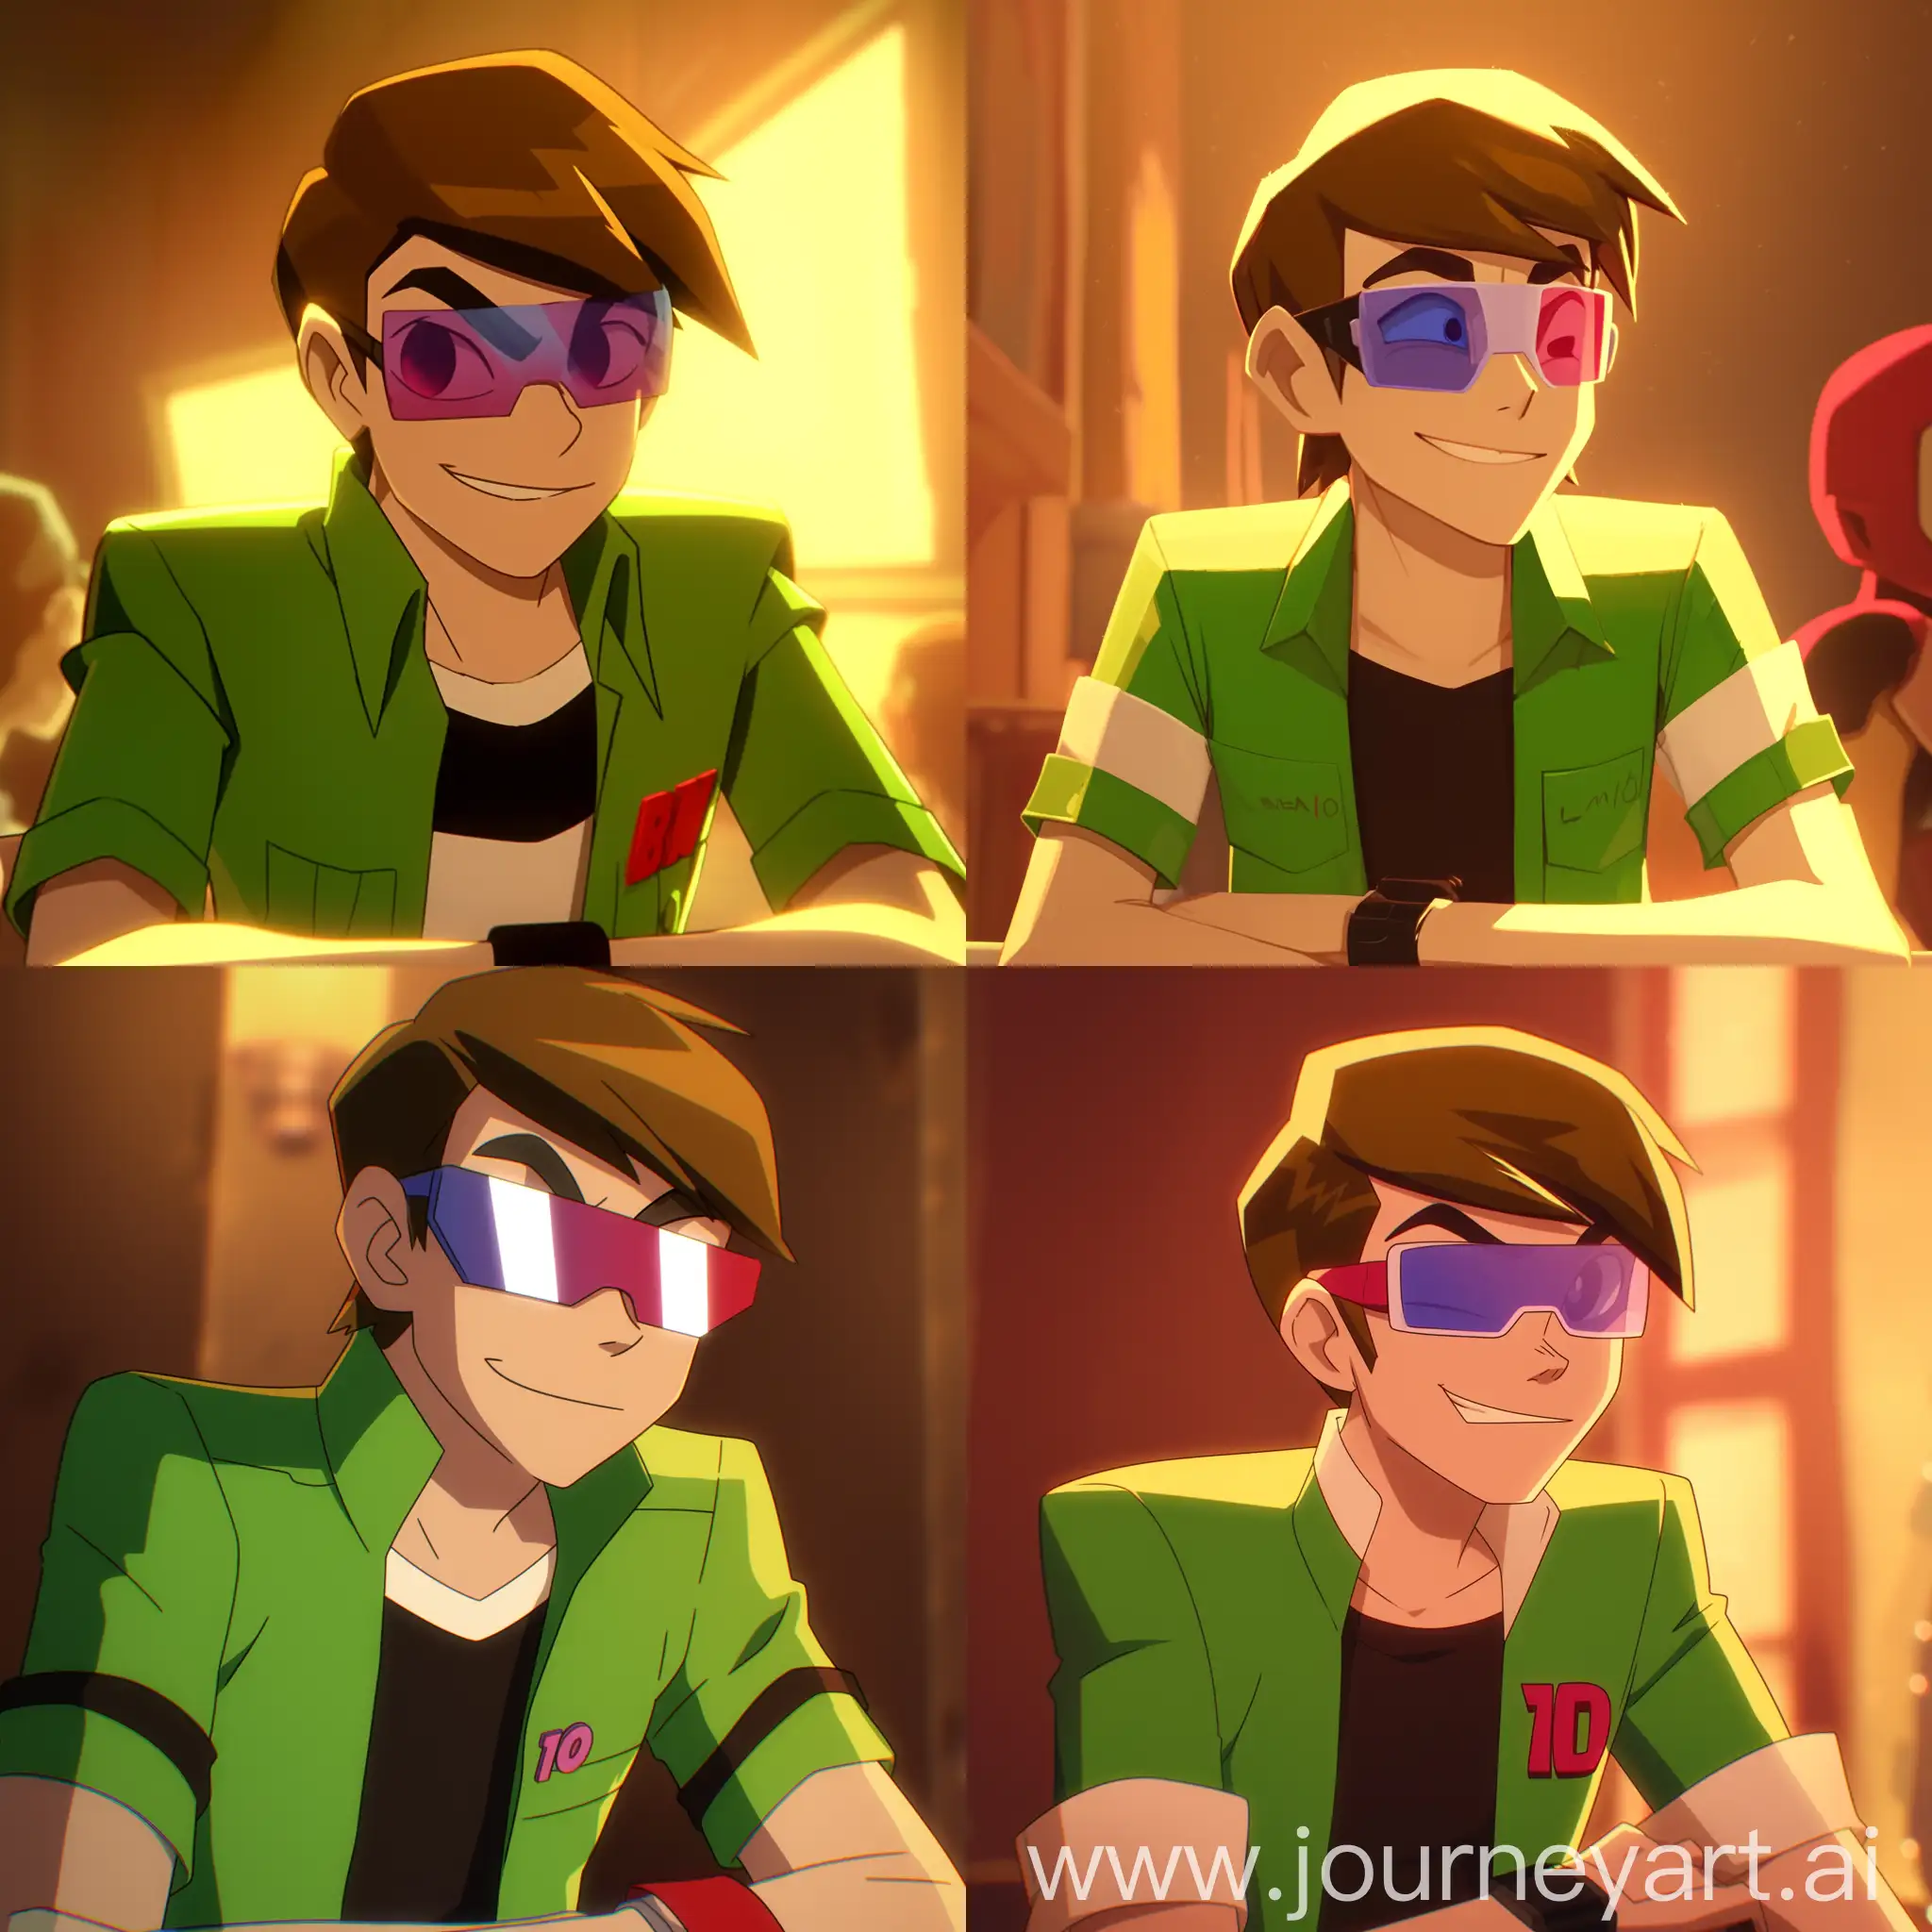  animated character in the style of Man of Action, wearing glasses with one lens of color purple and other lens of color grey, straight angle close shot with him smirking and "ben 10" is embroidered on his yellow jacket, still from the film. he's sitting on the empty hollow space with blur aesthetic background  --niji 6 --cref https://cdn.discordapp.com/attachments/1215979386310889605/1216982884083040266/Picsart_24-03-08_22-57-05-471.jpg?ex=66025ea2&is=65efe9a2&hm=a3c3cd11df6f7a445bf1bb038220edc722e23bafed0277ddb6c2189fdd7132ea& 